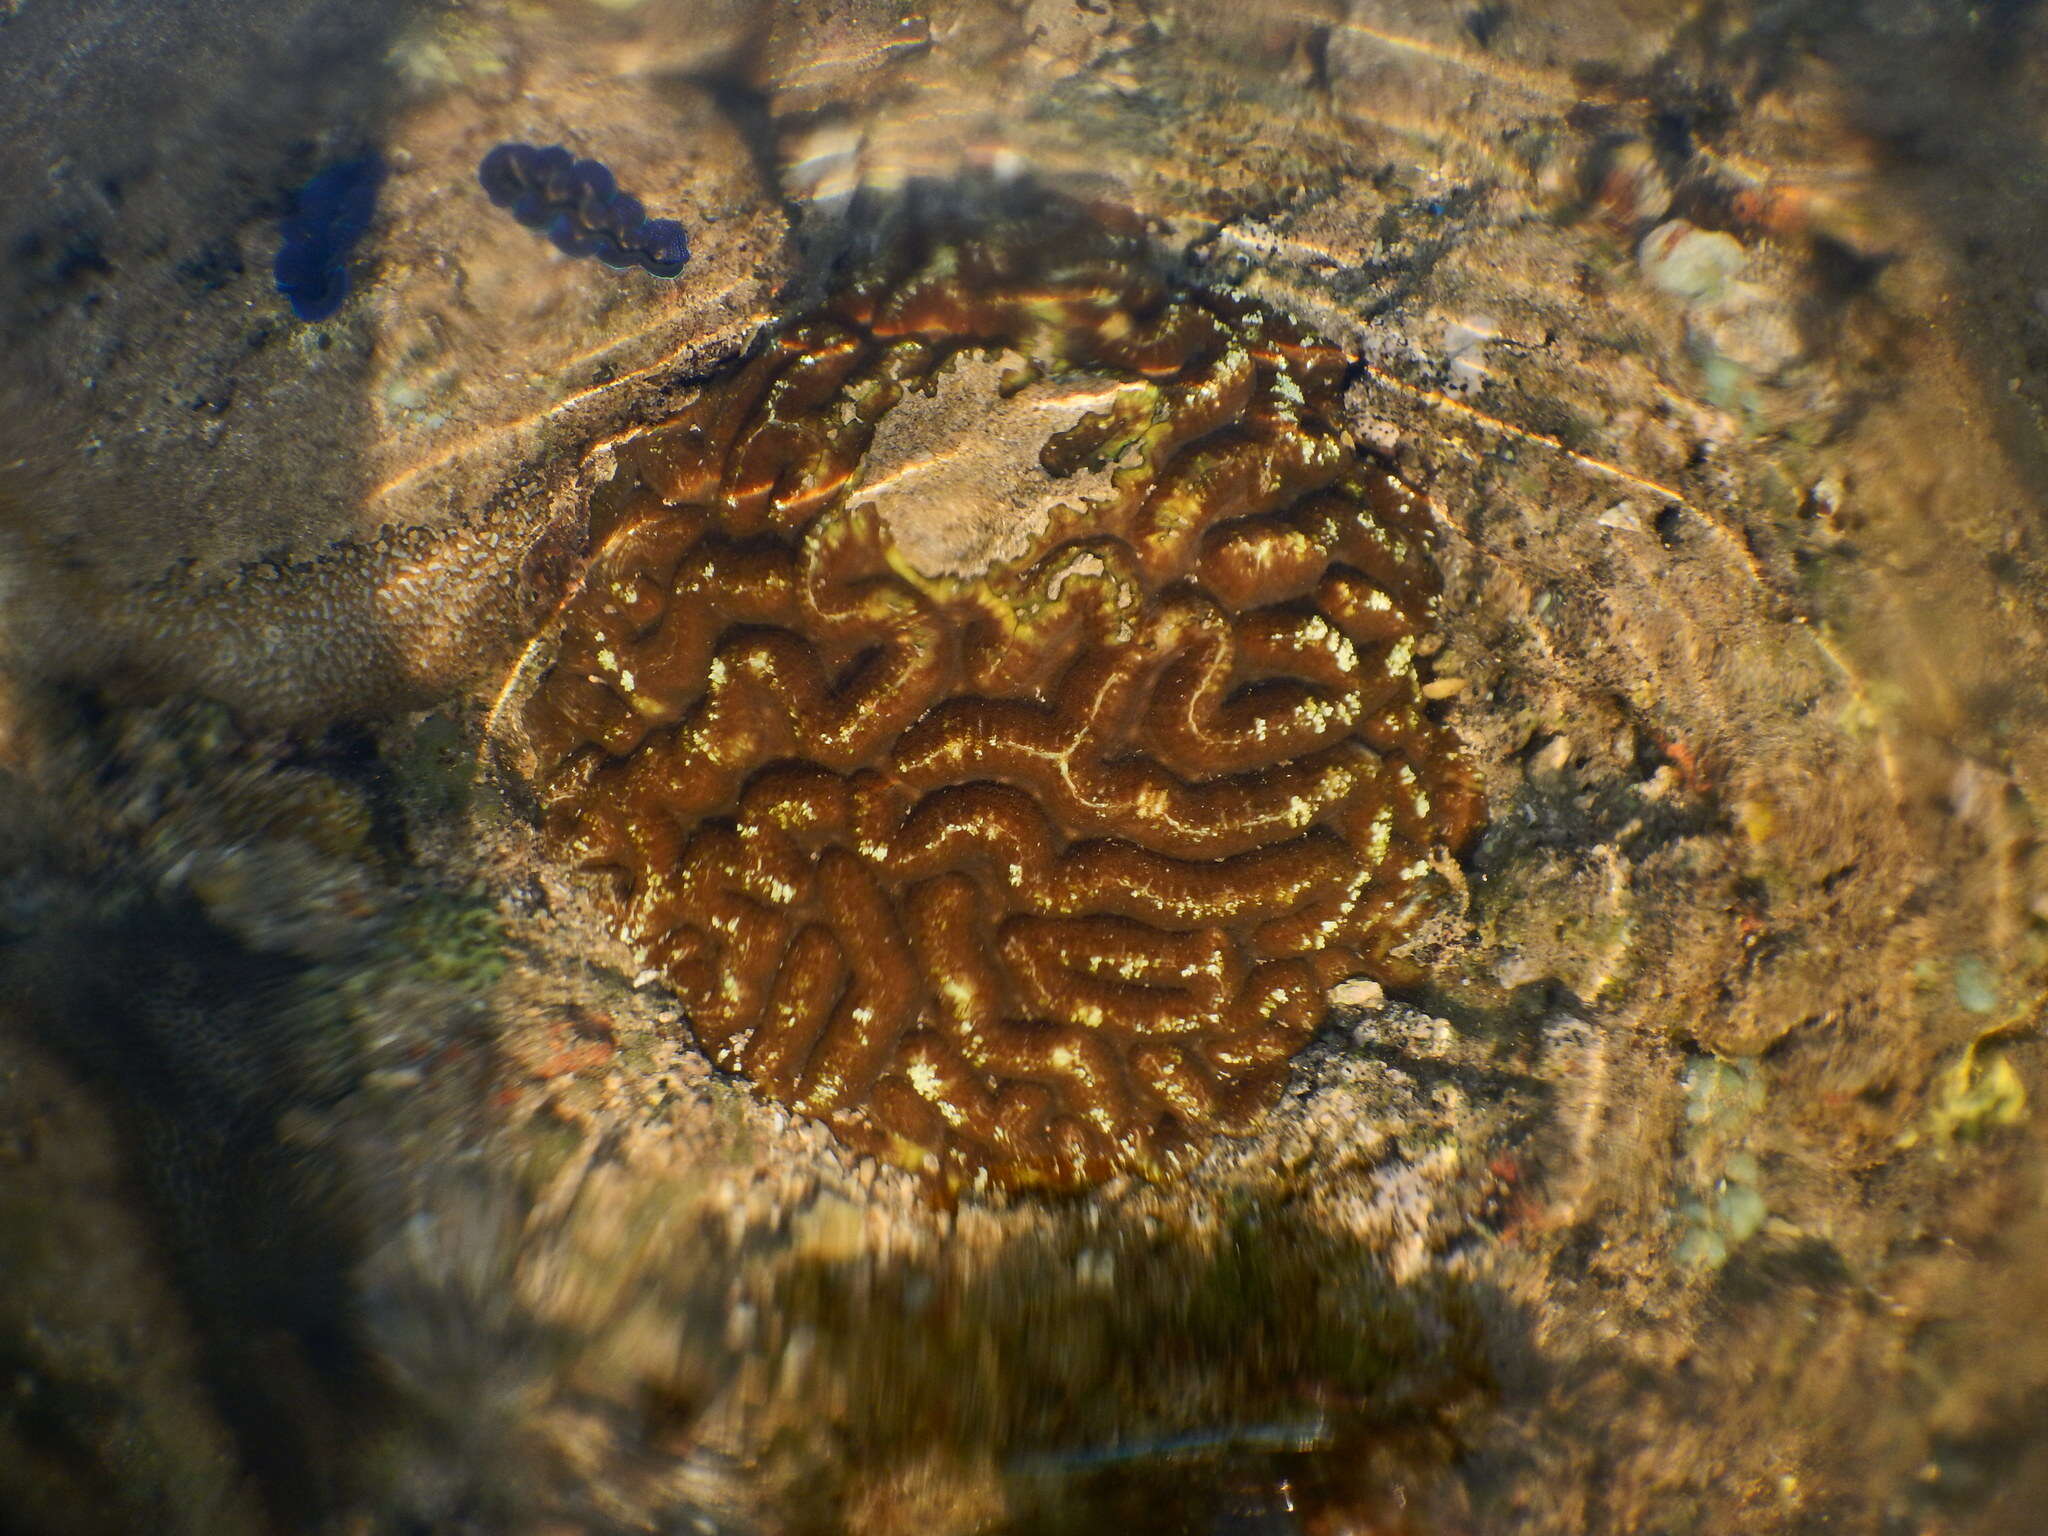 Image of Greater Brain Coral